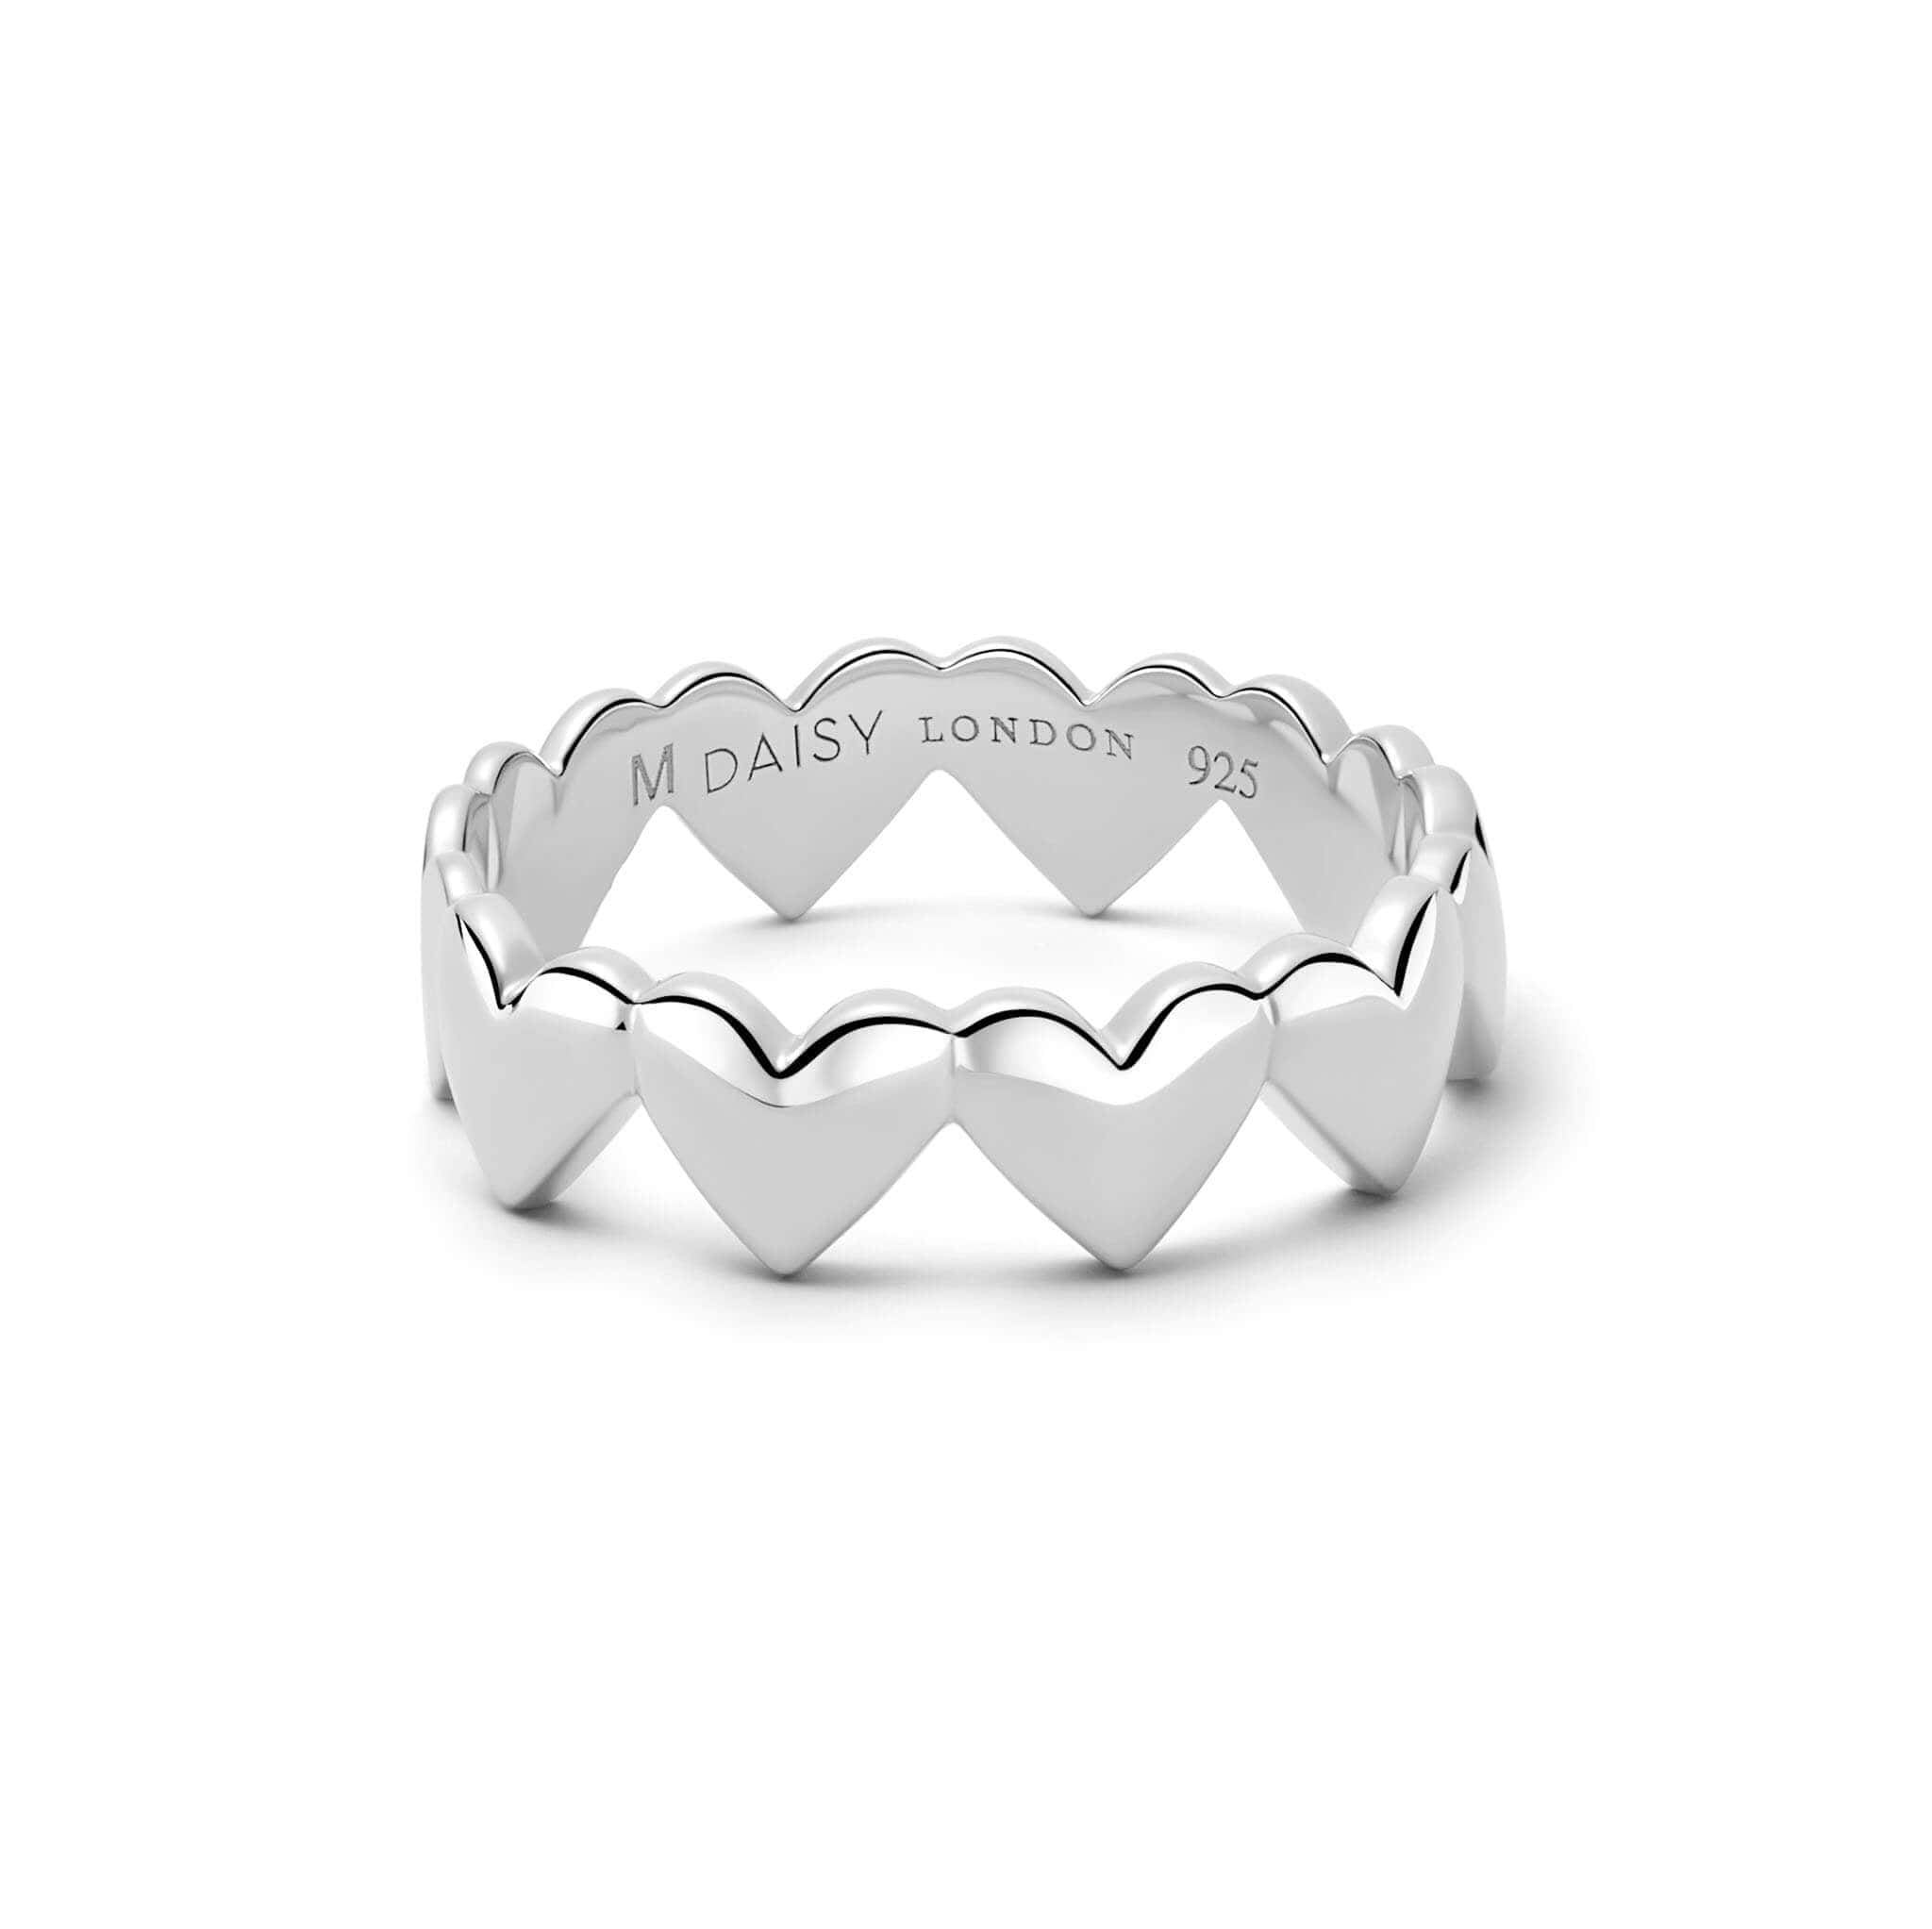 Buy Thorn Crown Ring, Crown of Thorn Sterling Silver Ring, Silver Thorns  Ring Online in India - Etsy